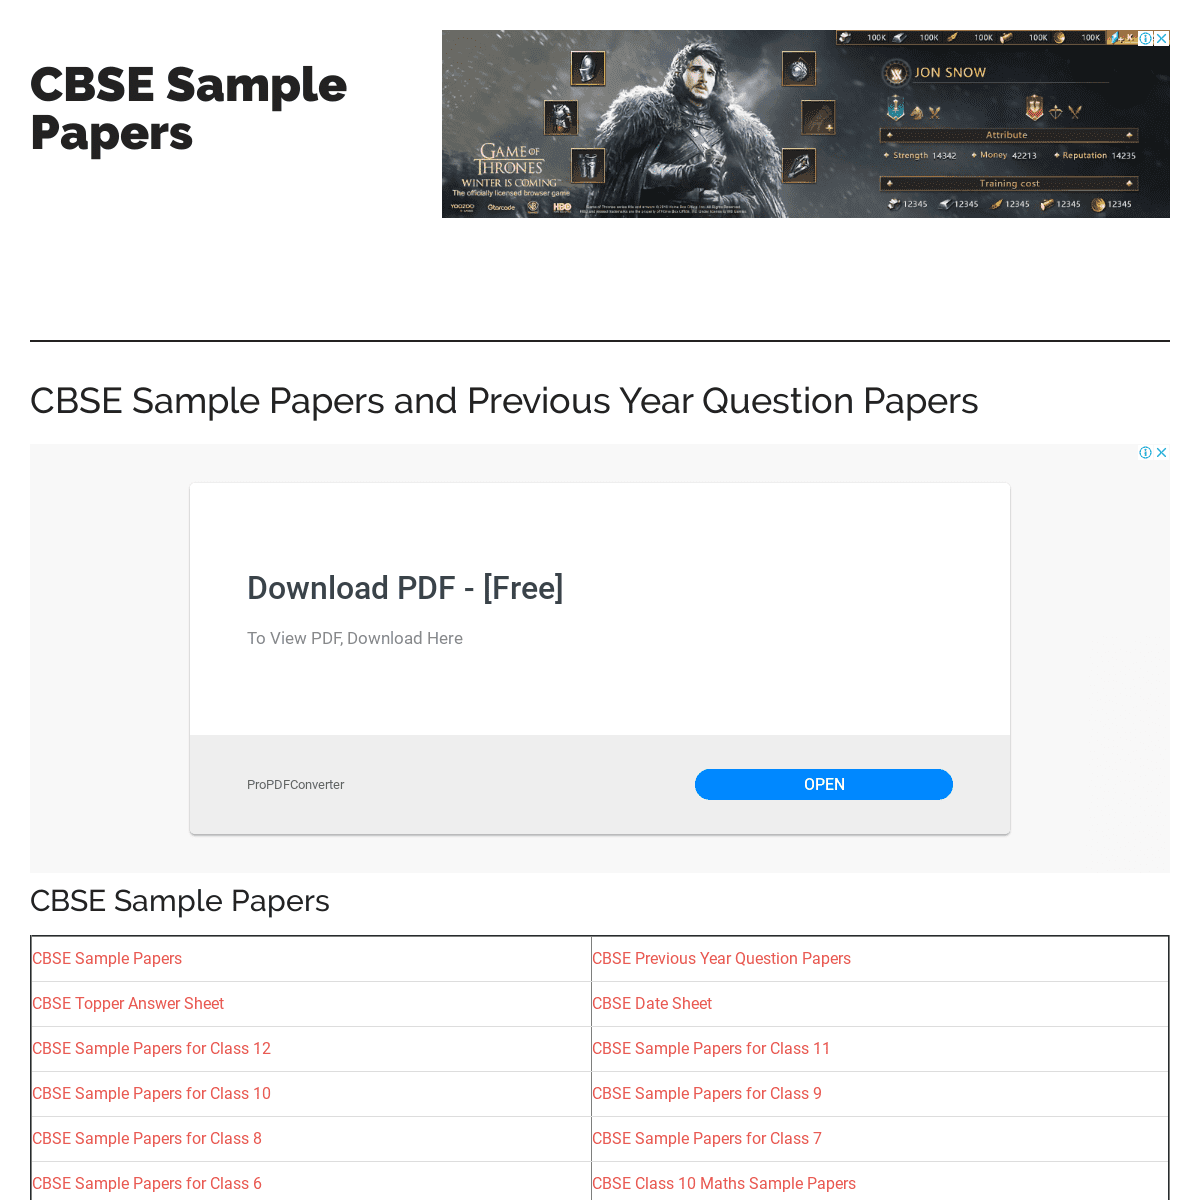 A complete backup of cbsesamplepapers.info